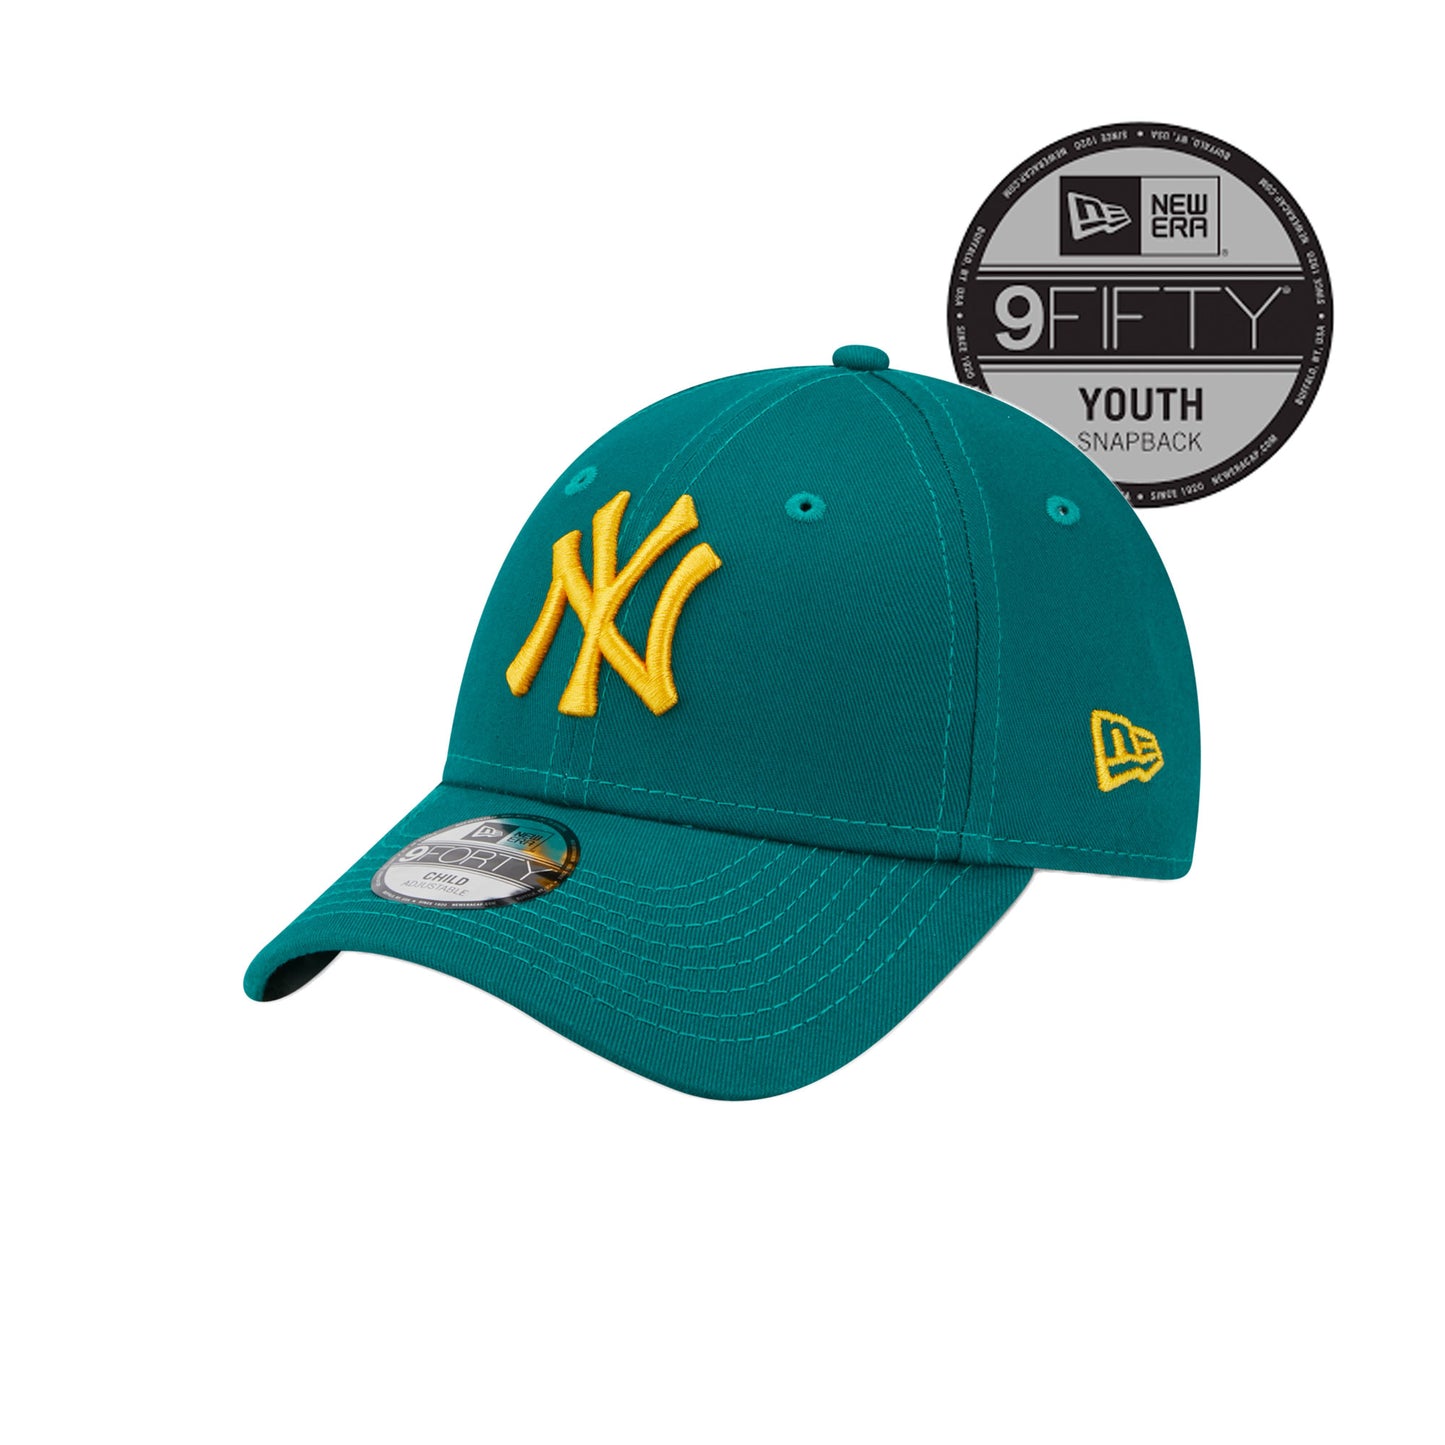 New York Yankees New Era 9FORTY YOUTH Strap back Cap green